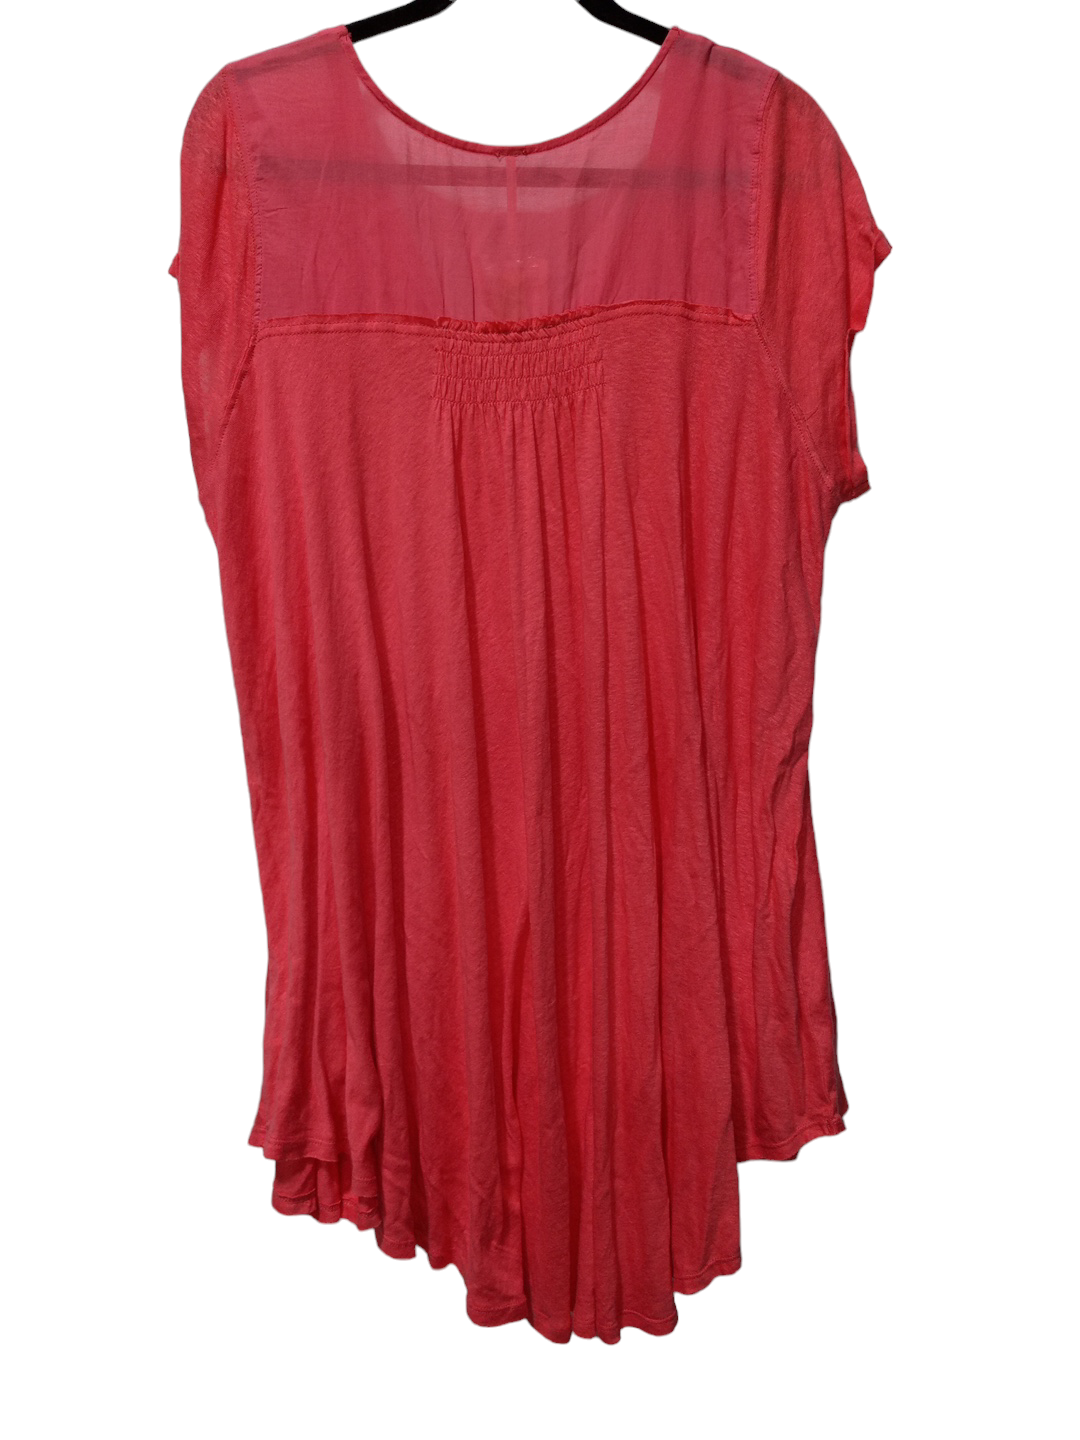 Pink Dress Casual Short Free People, Size L